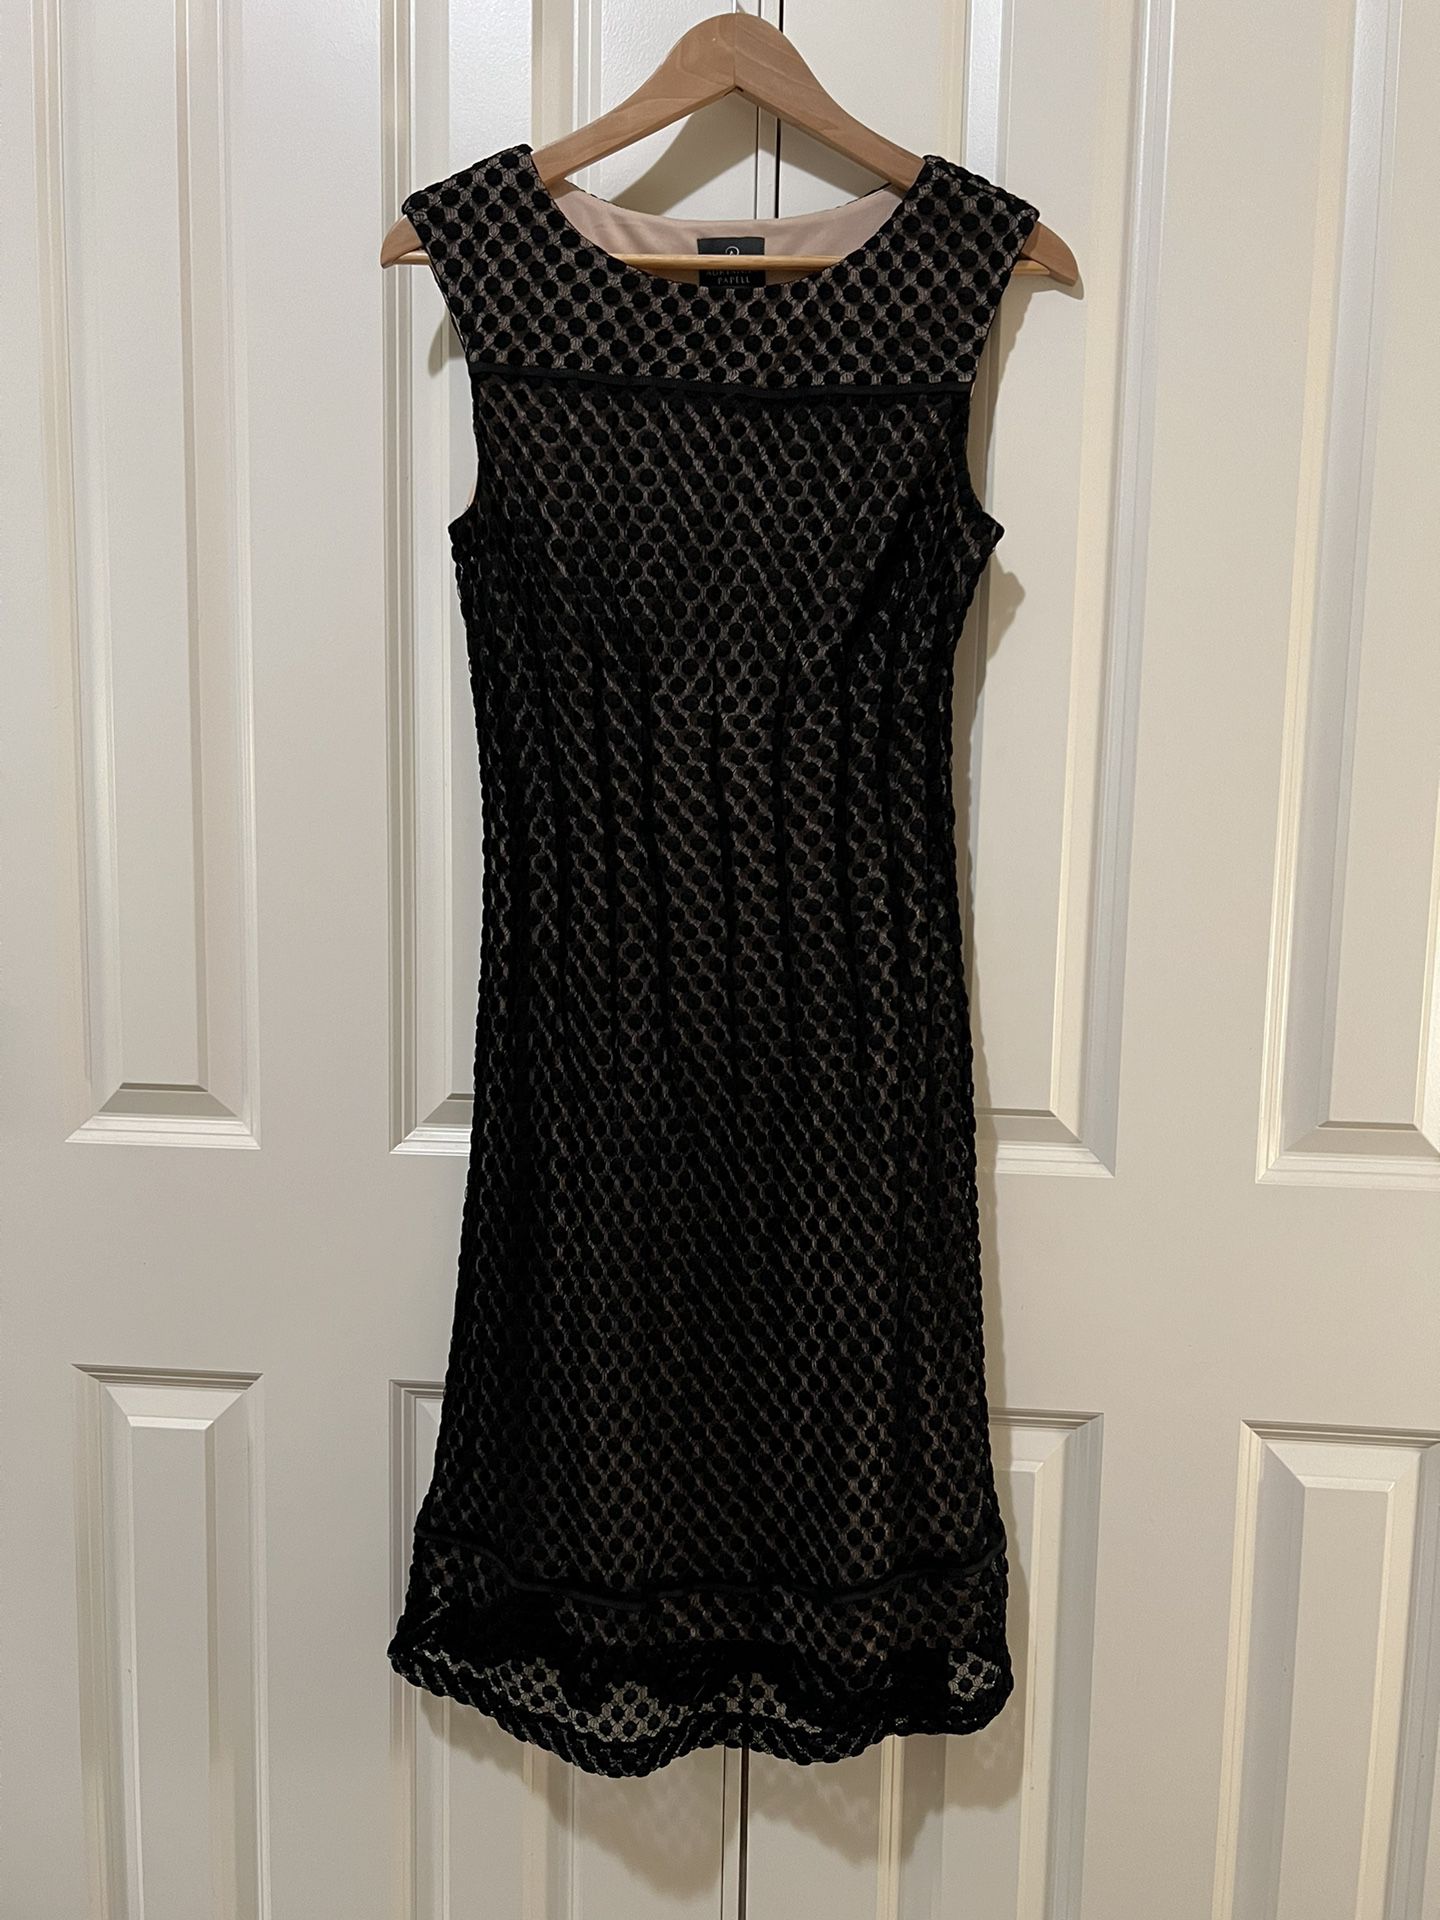 Adrianna Papell Black Lace Overlay (w/Camel Liner) Dress, Size 10, in Stretchy Knit Fabric